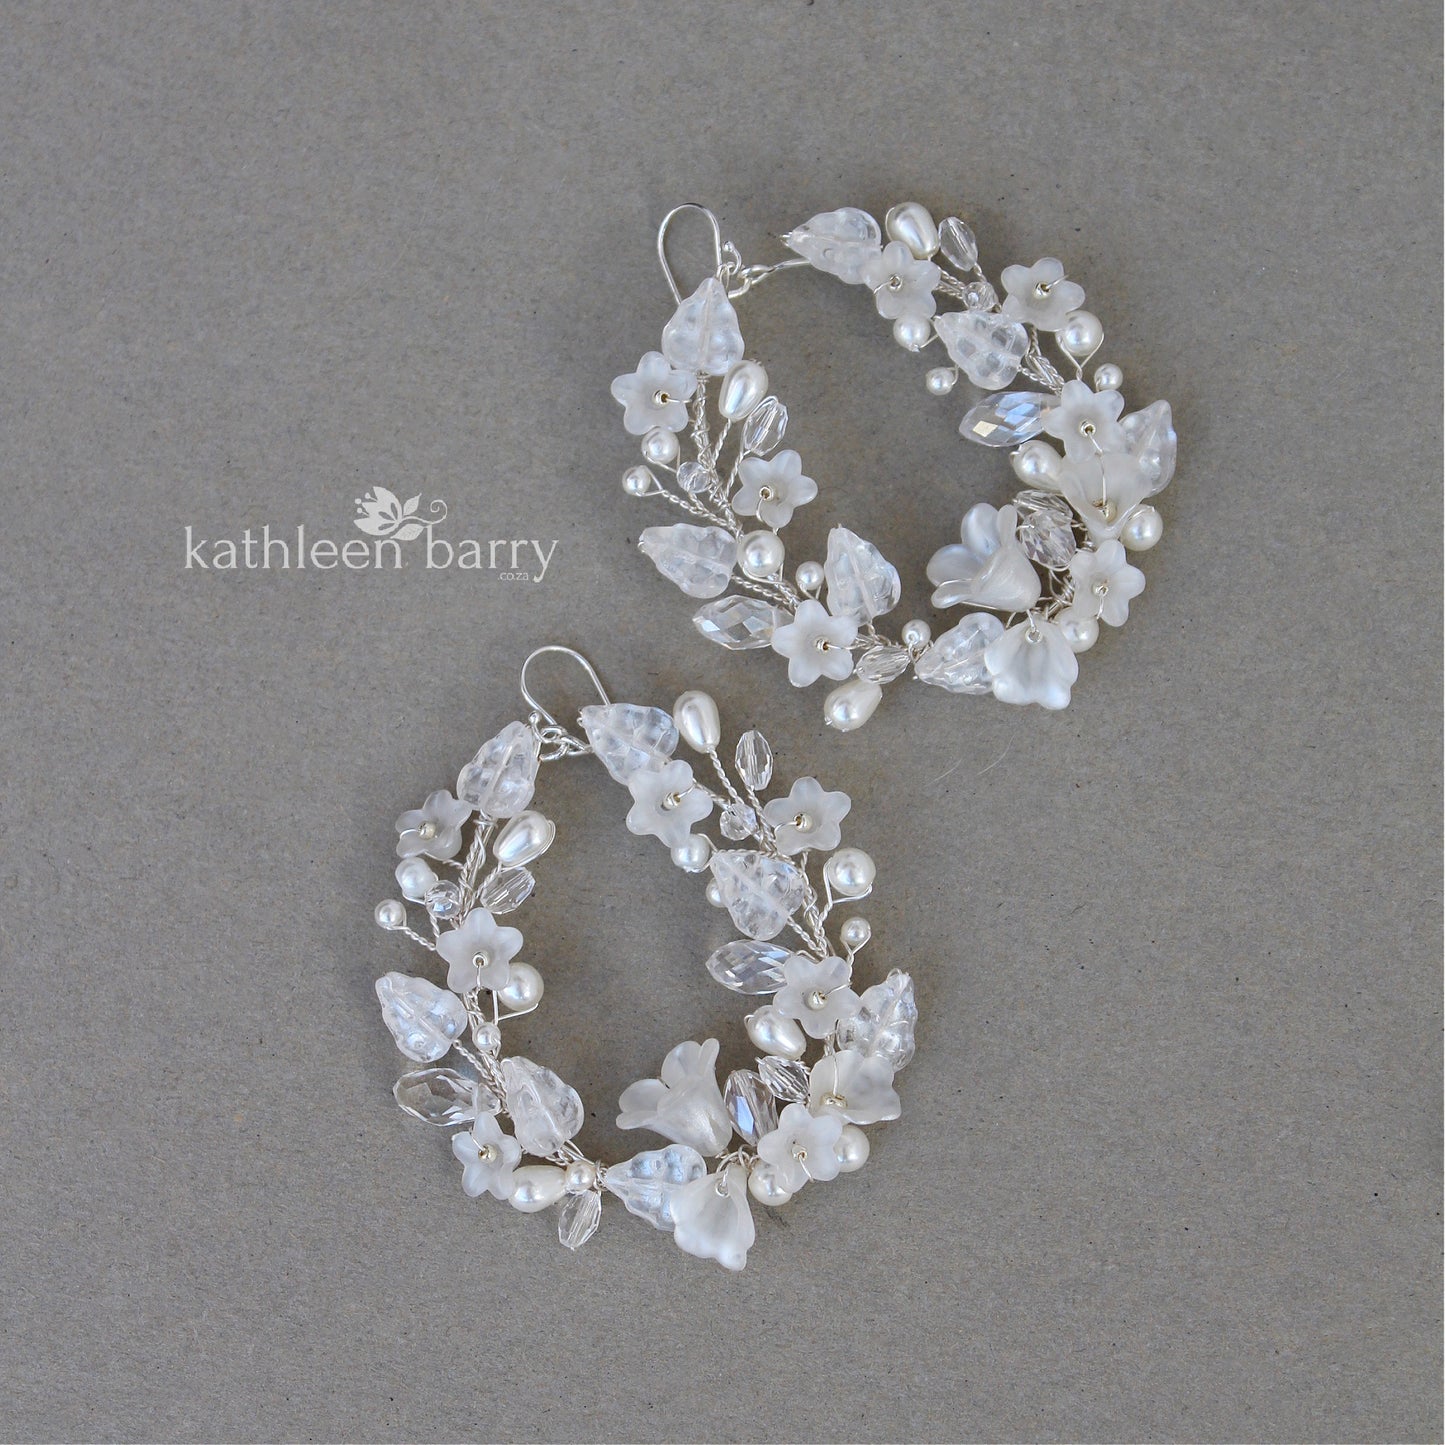 Lisa floral hoop earrings - color & metallic options available - gold, rose gold or silver